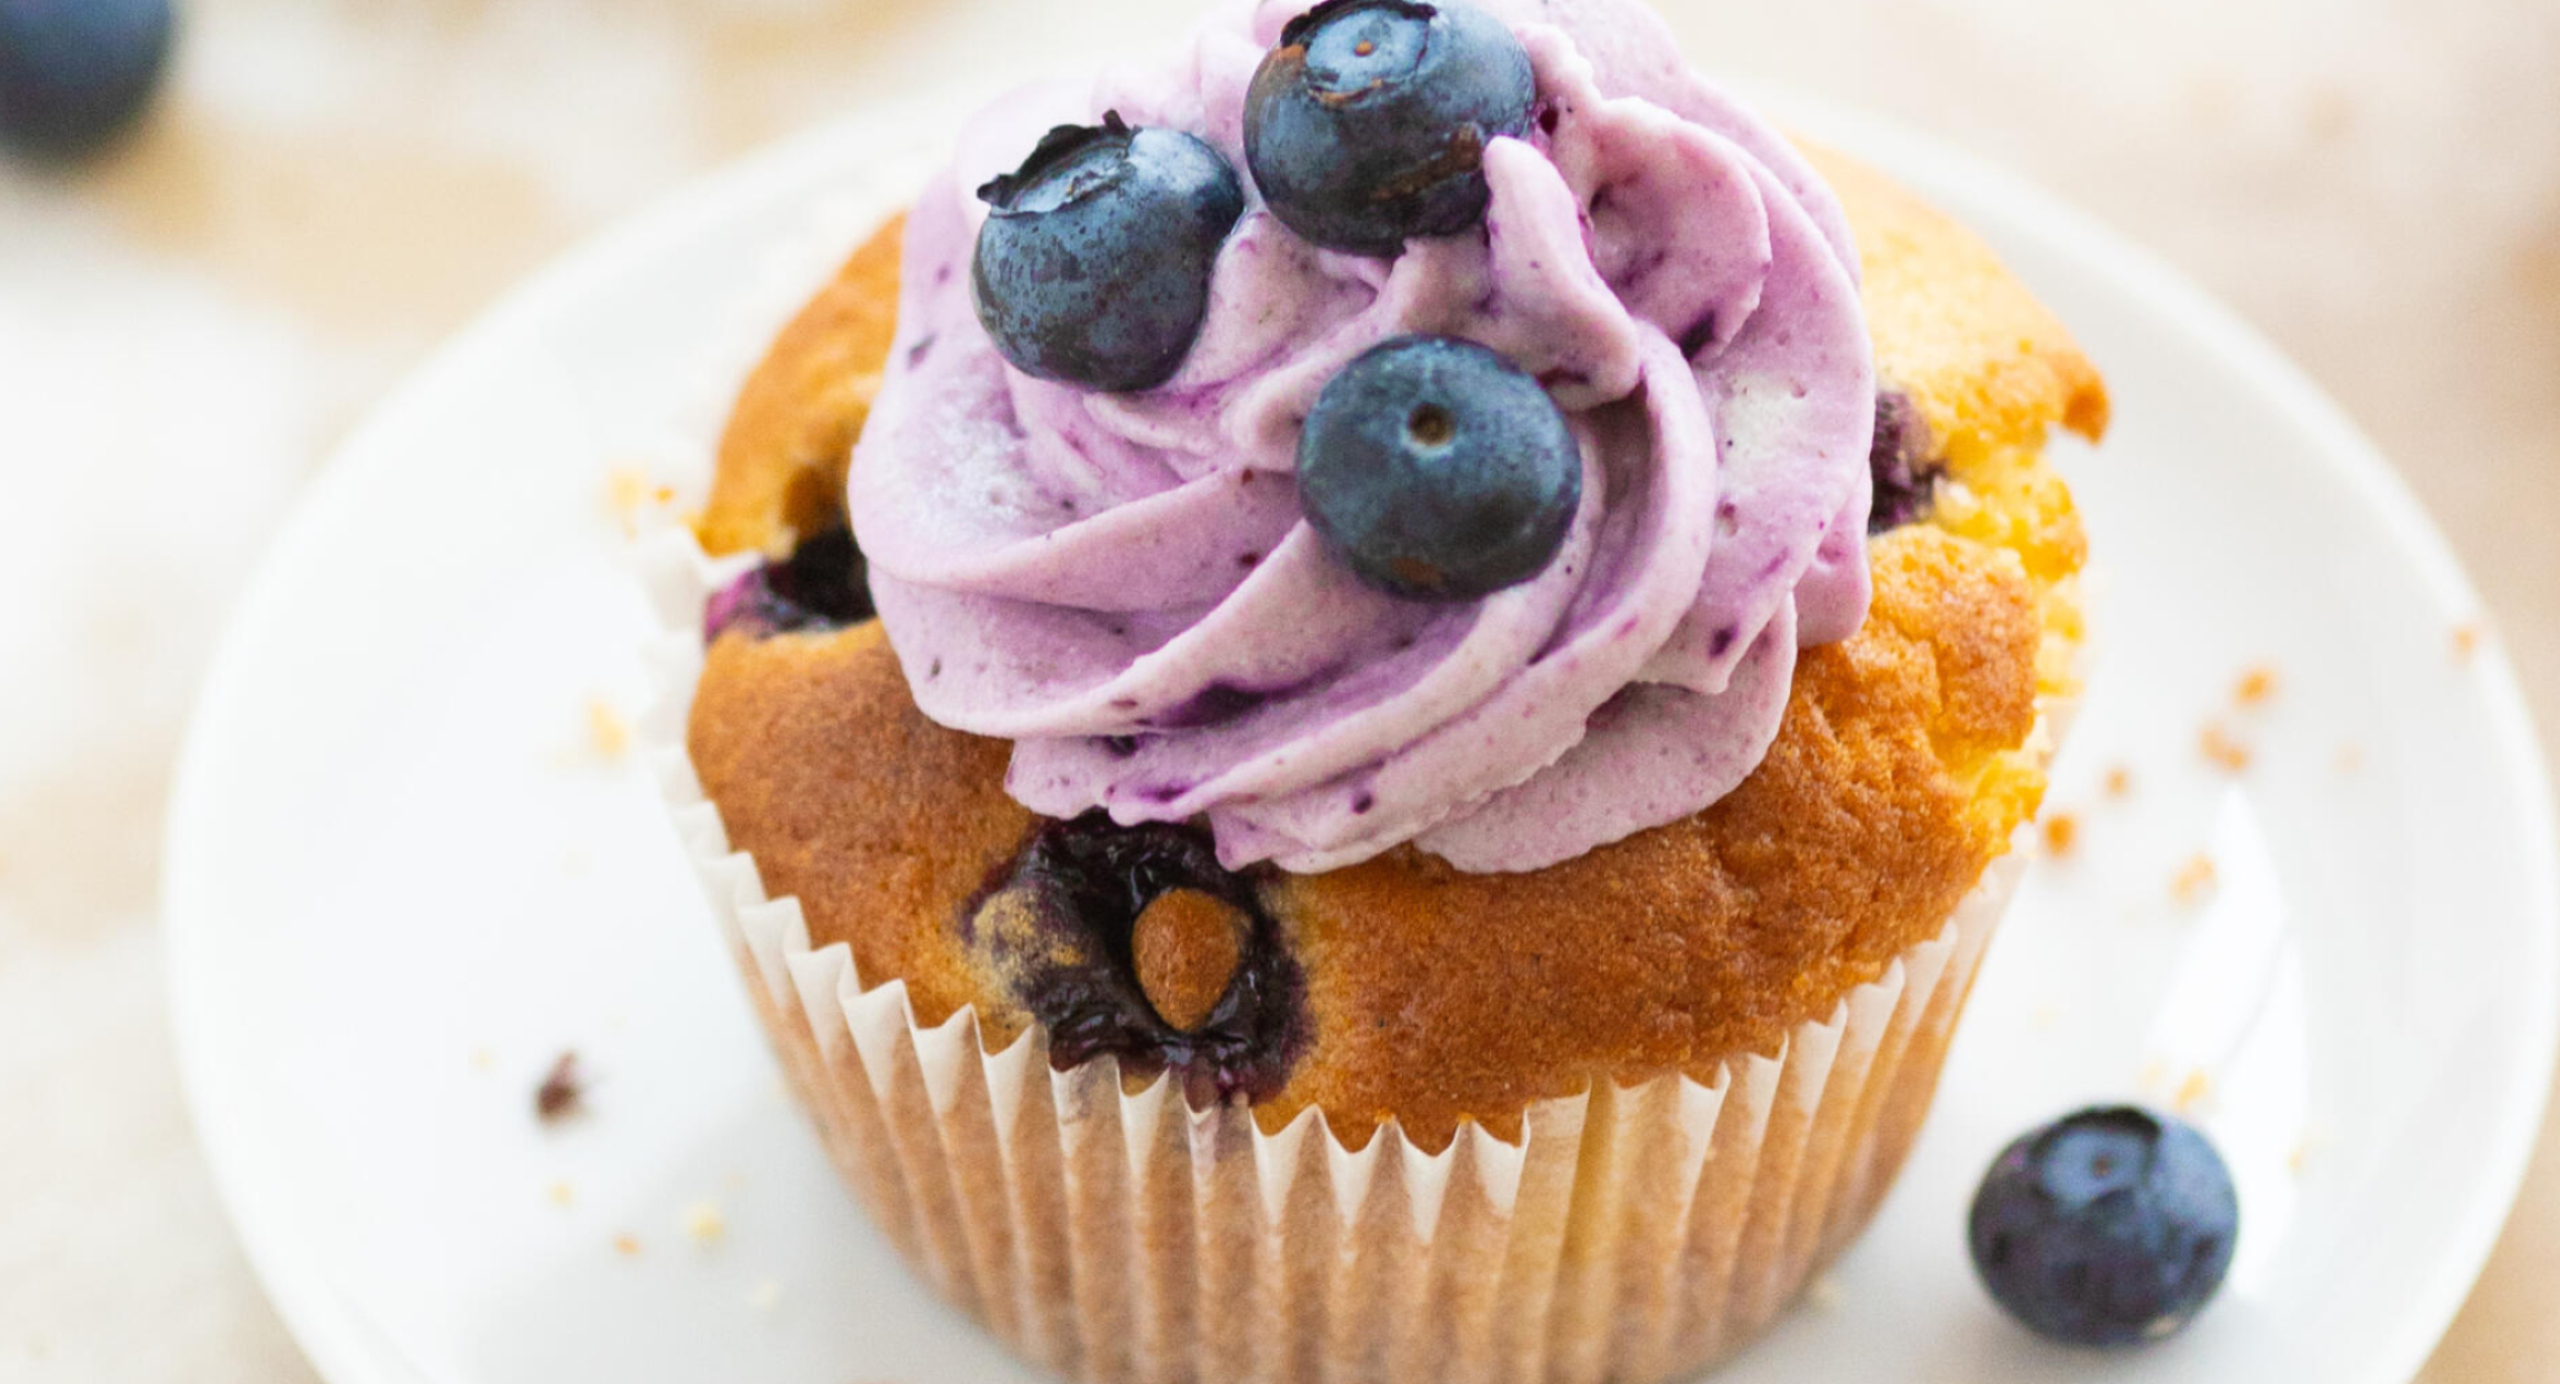 Juicy blueberry cupcakes, Scrumptious baking, Happiness in every bite, Berry delight, 2560x1390 HD Desktop